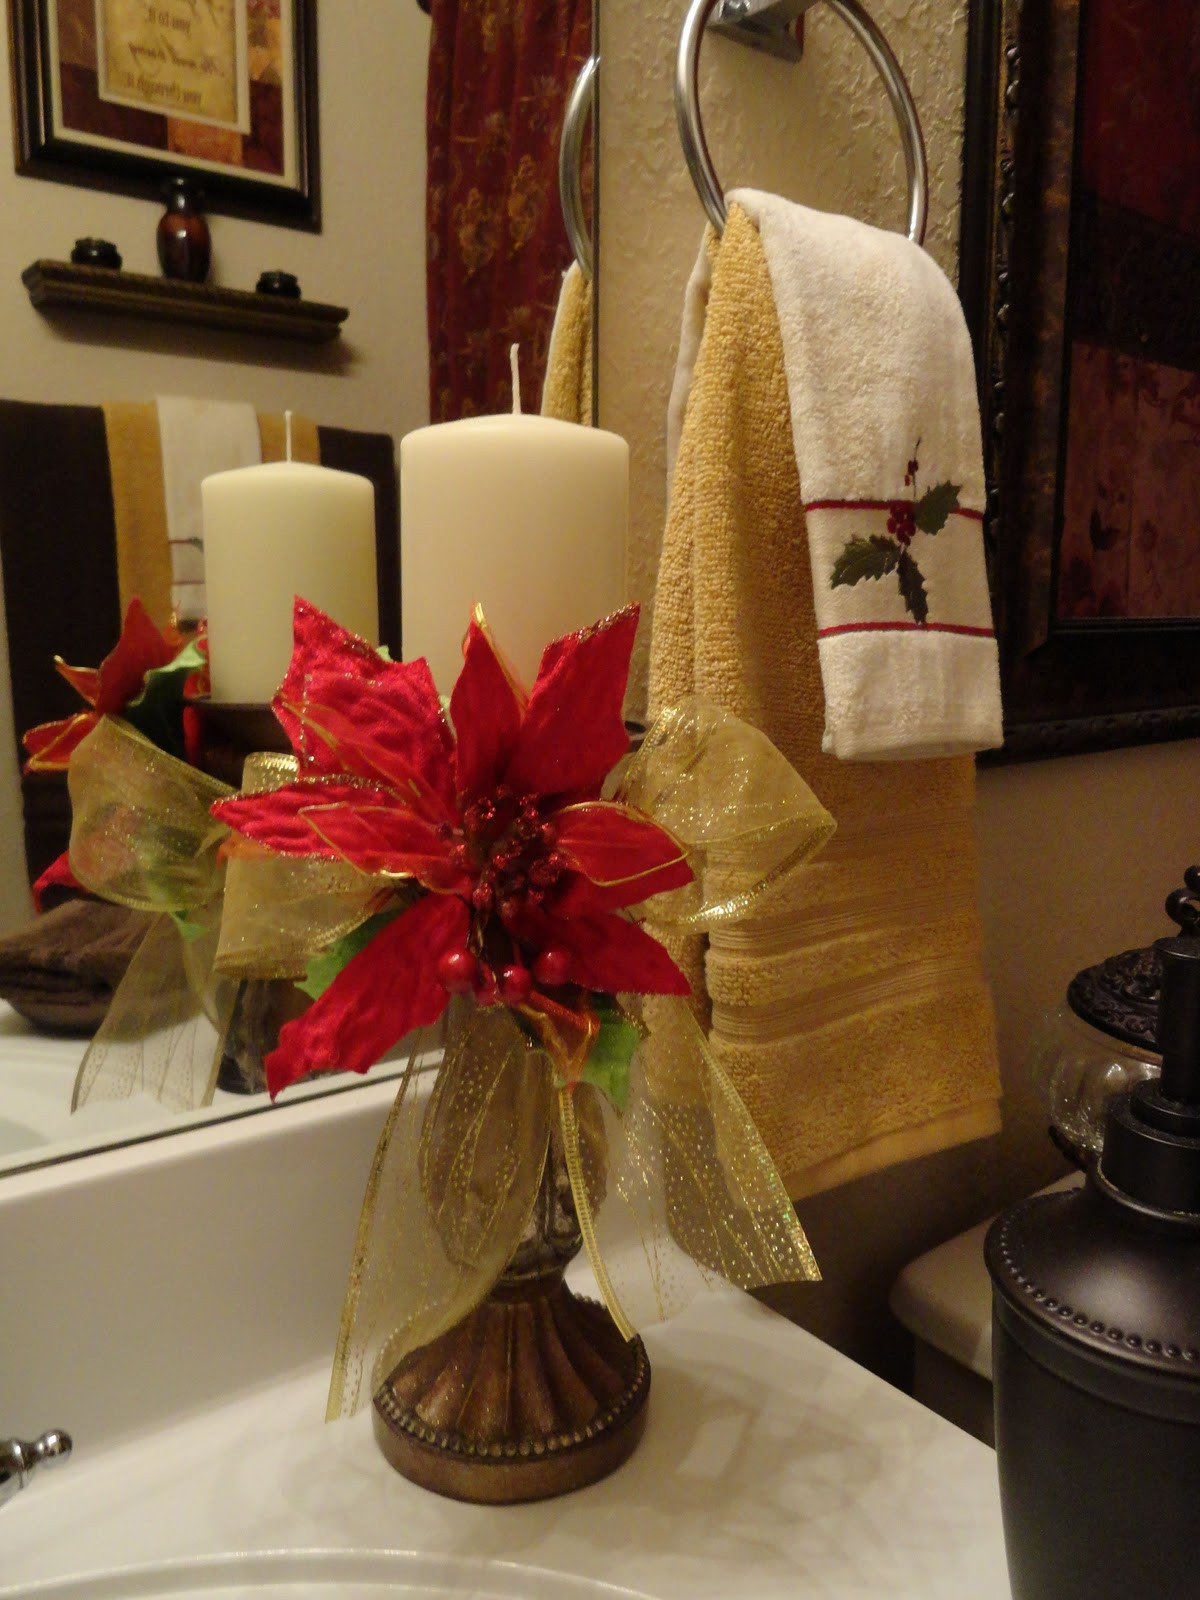 Christmas Bathroom Decor Sets
 Our Home Away From Home A TOUCH OF CHRISTMAS IN THE GUEST